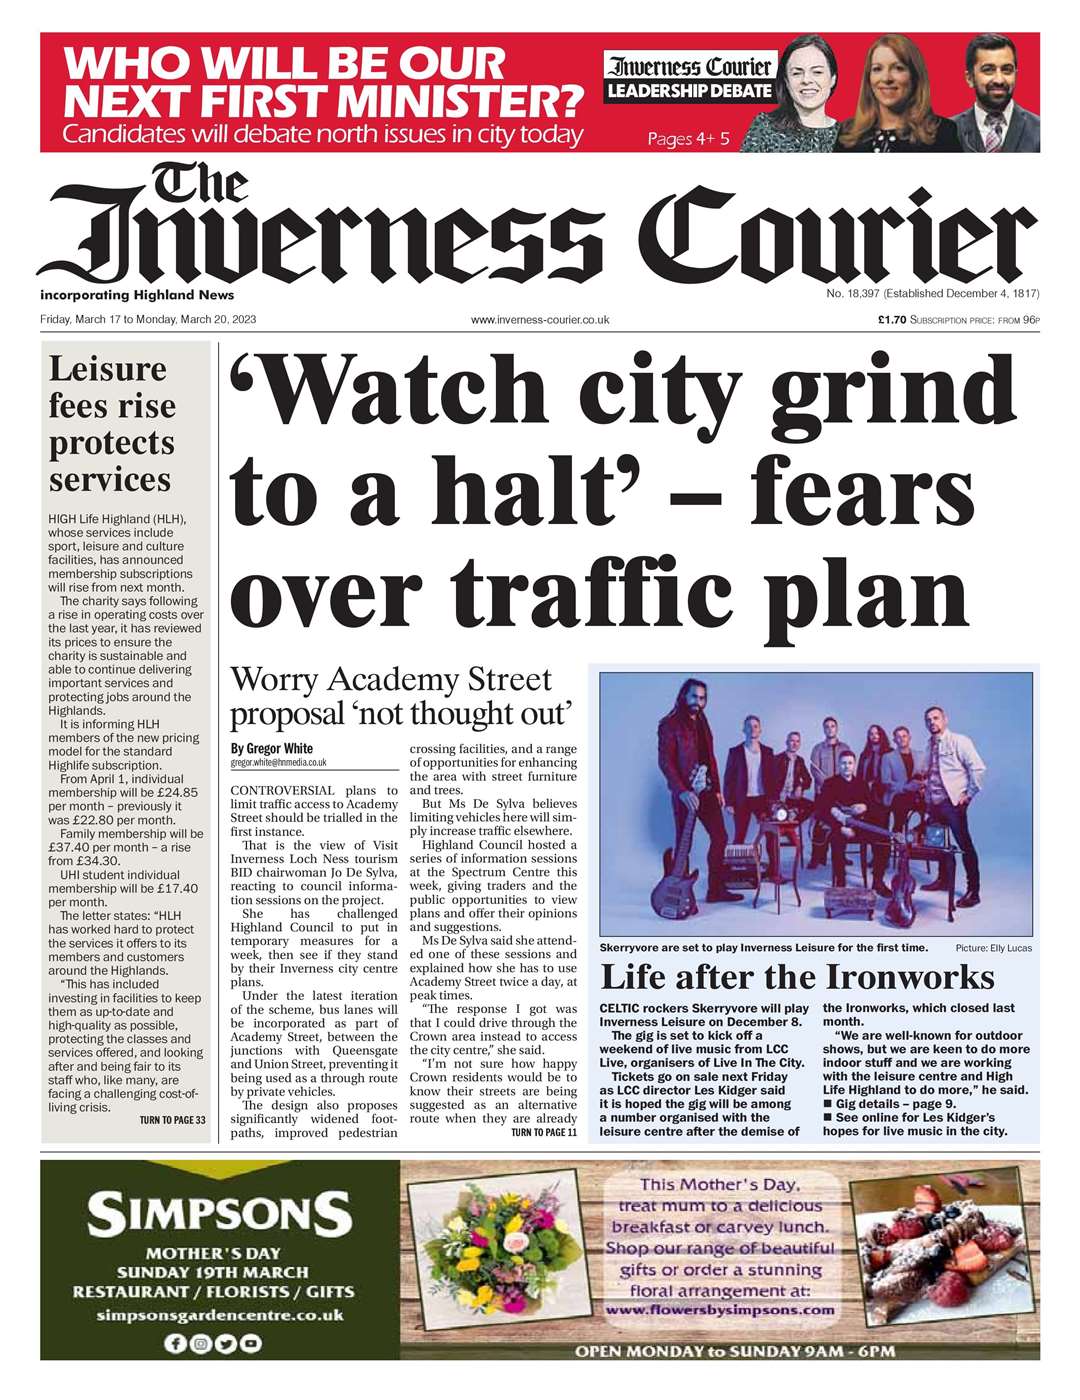 The Inverness Courier, March 17, front page.